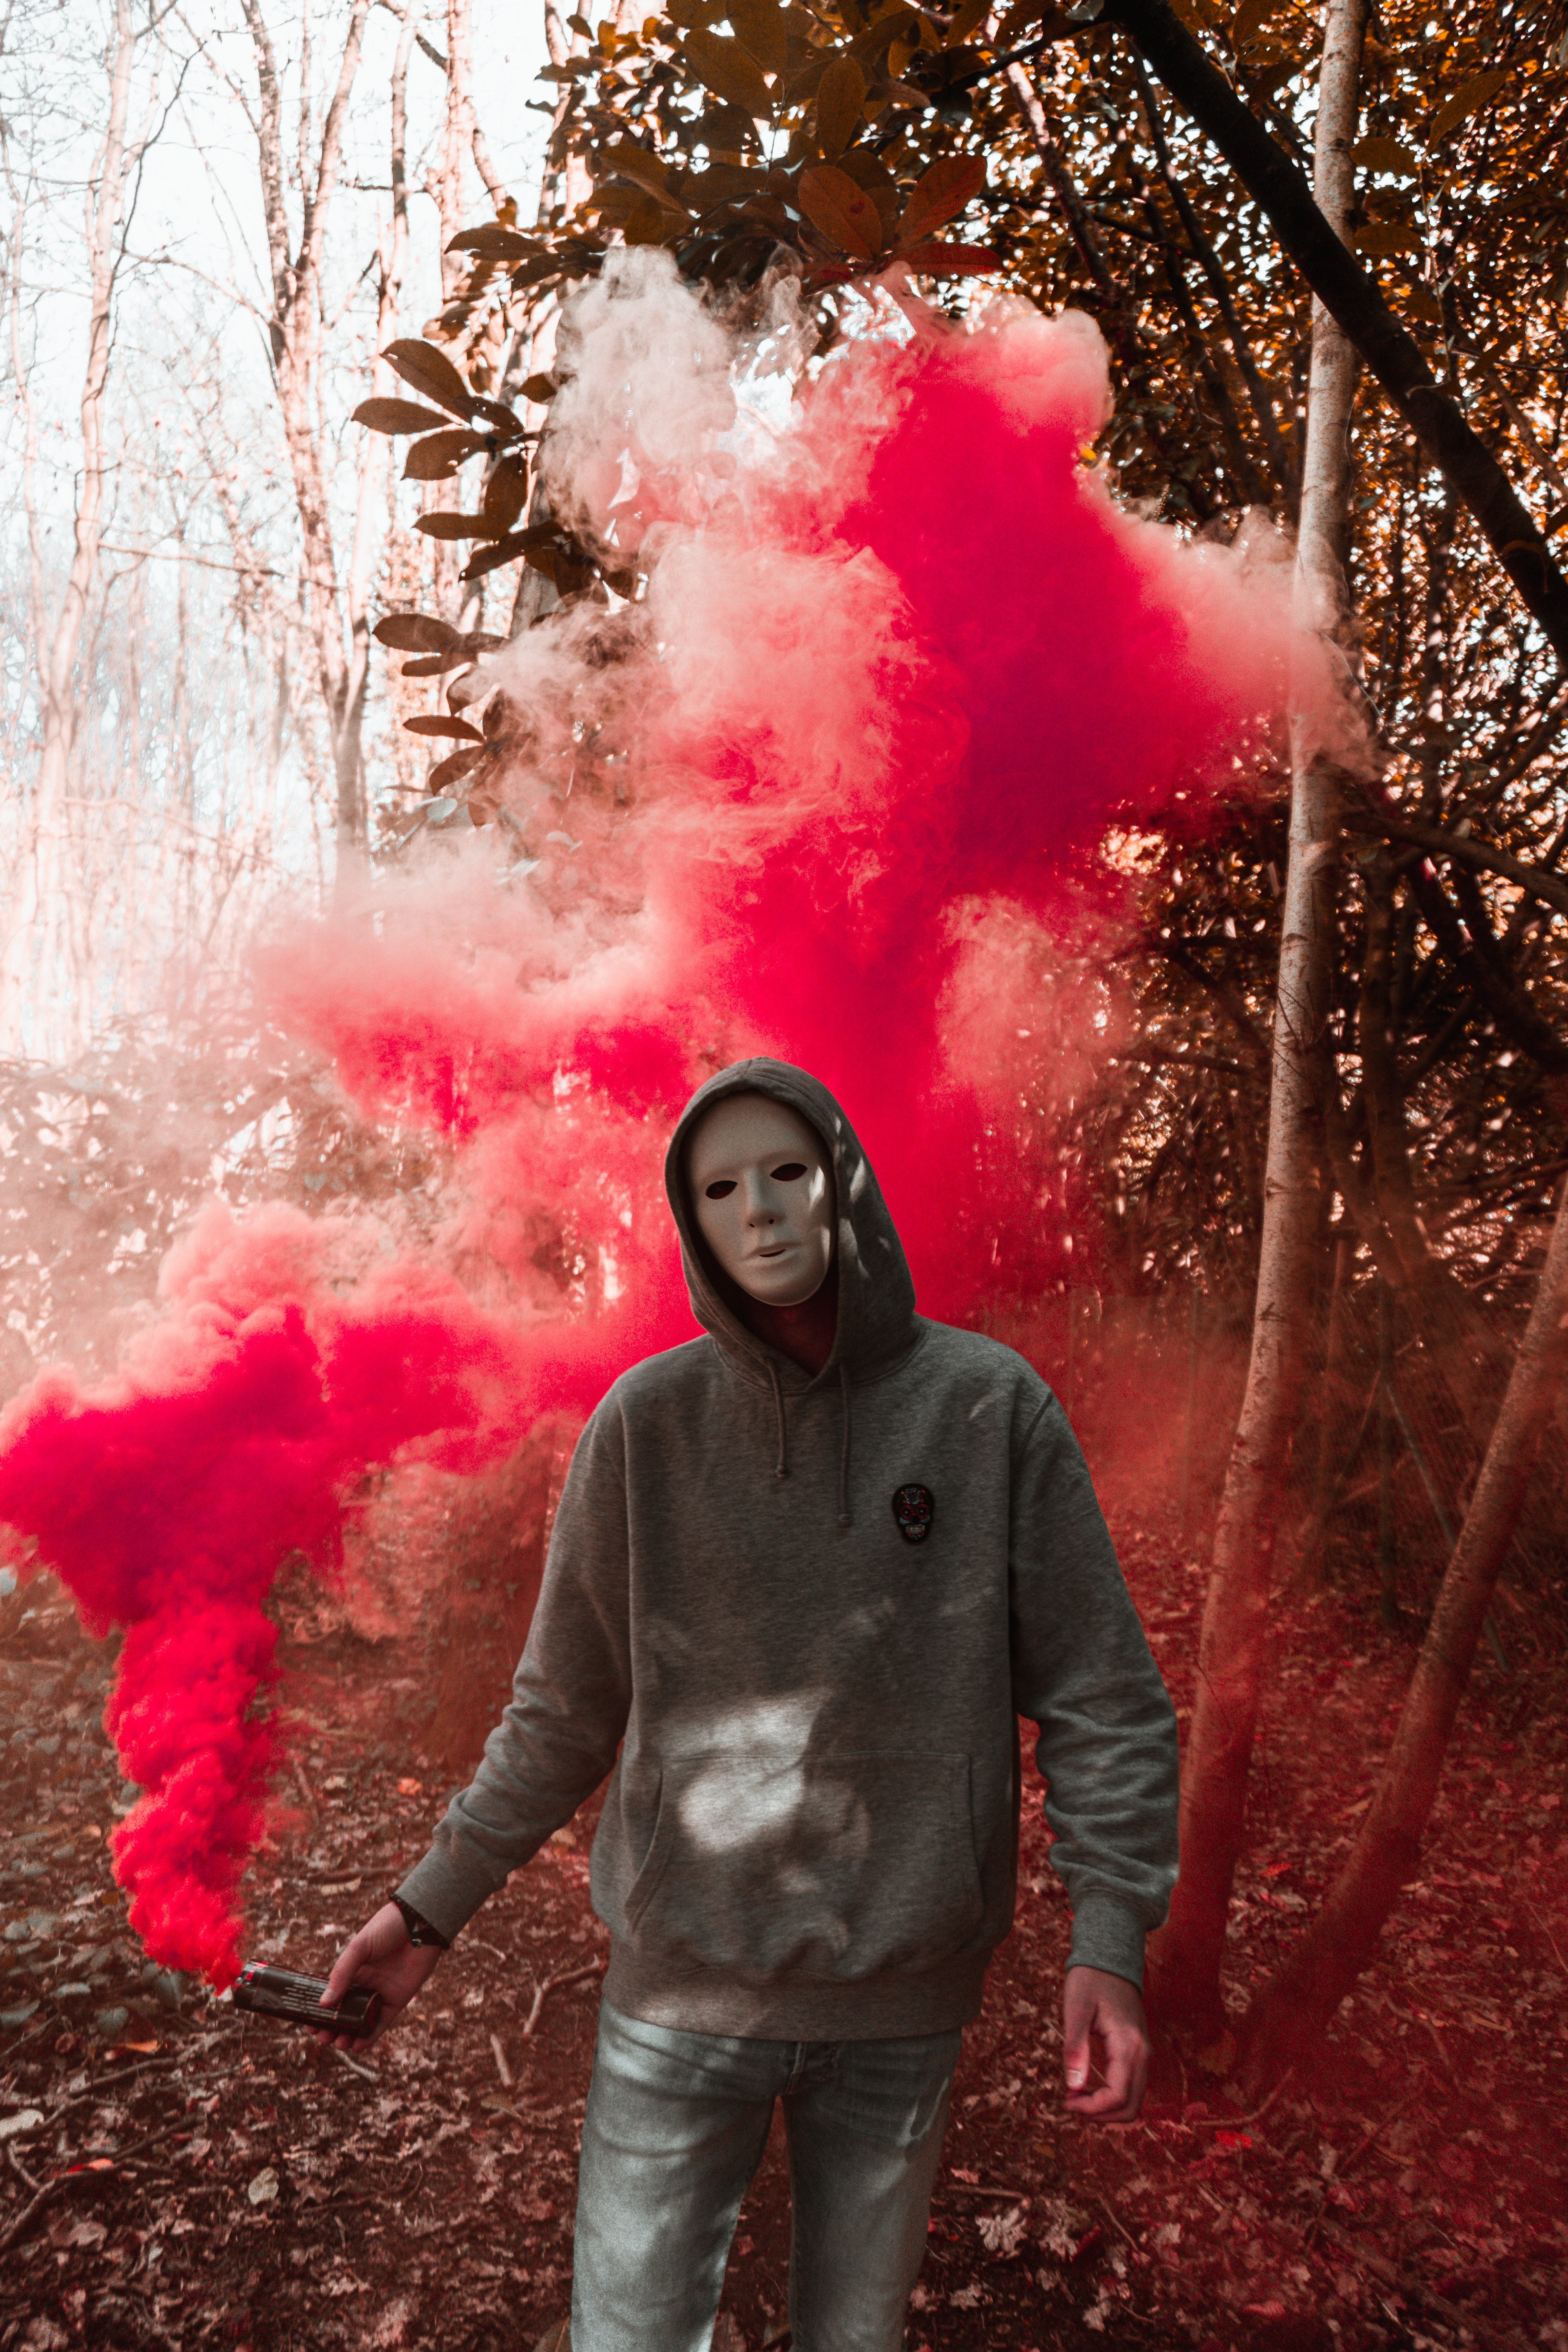 141588 Screensavers and Wallpapers Hood for phone. Download anonymous, miscellanea, miscellaneous, mask, colored smoke, coloured smoke, hood pictures for free